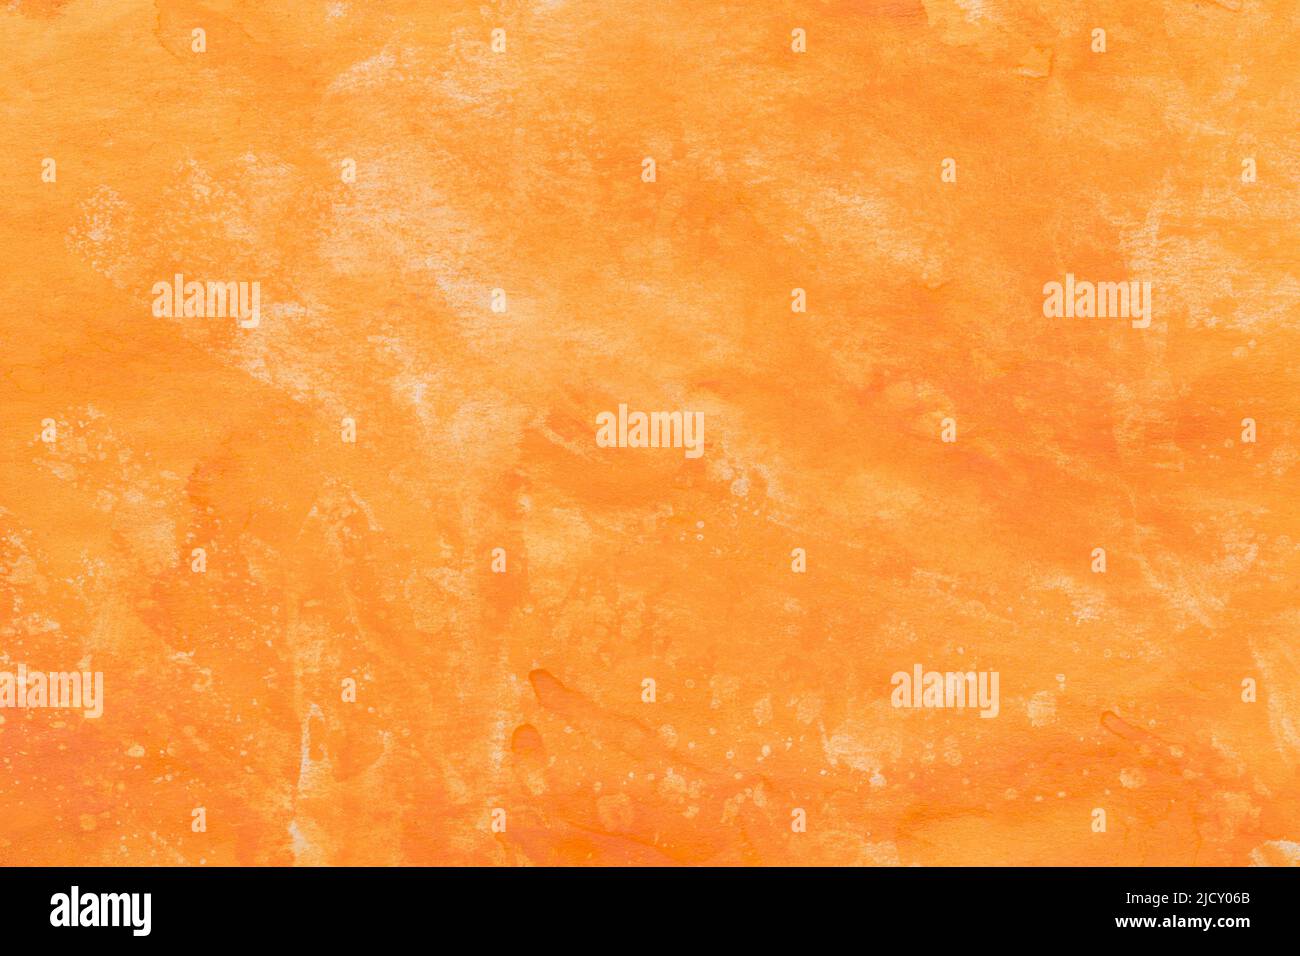 orange painted watercolor on paper background texture Stock Photo